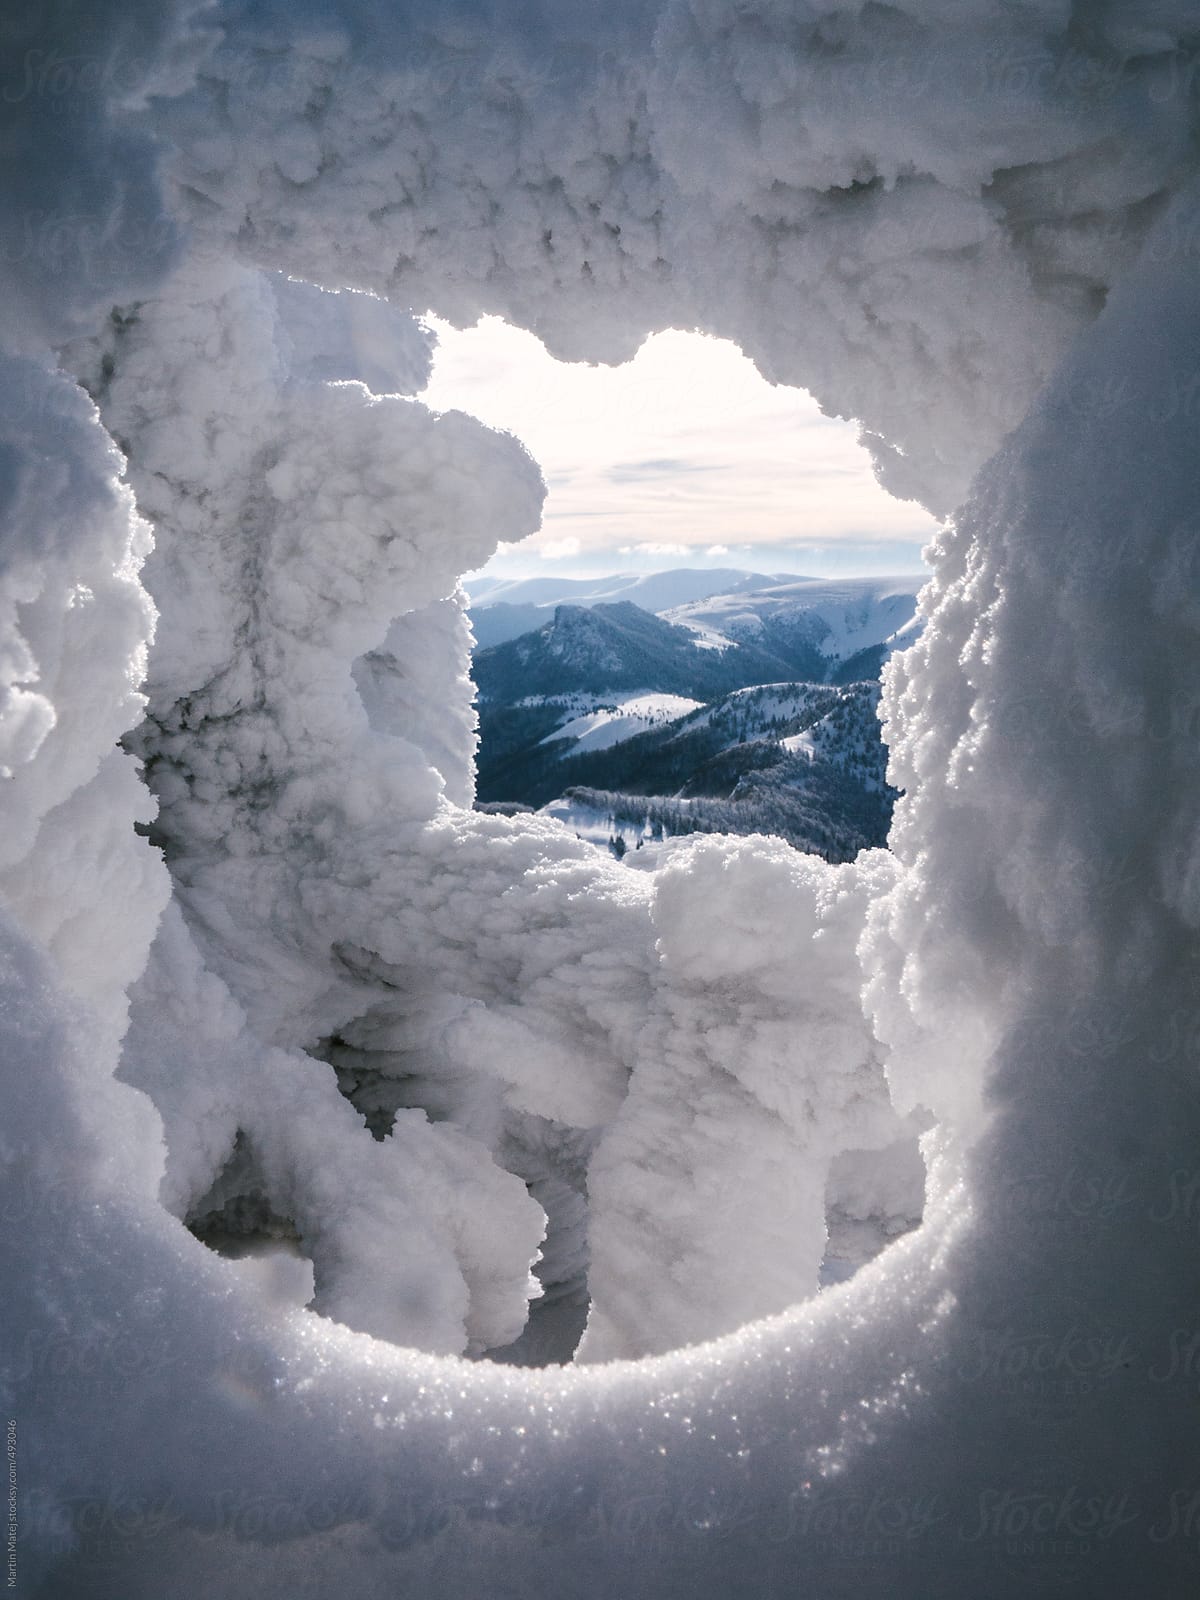 Velka Fatra mountains framed in hole in snow